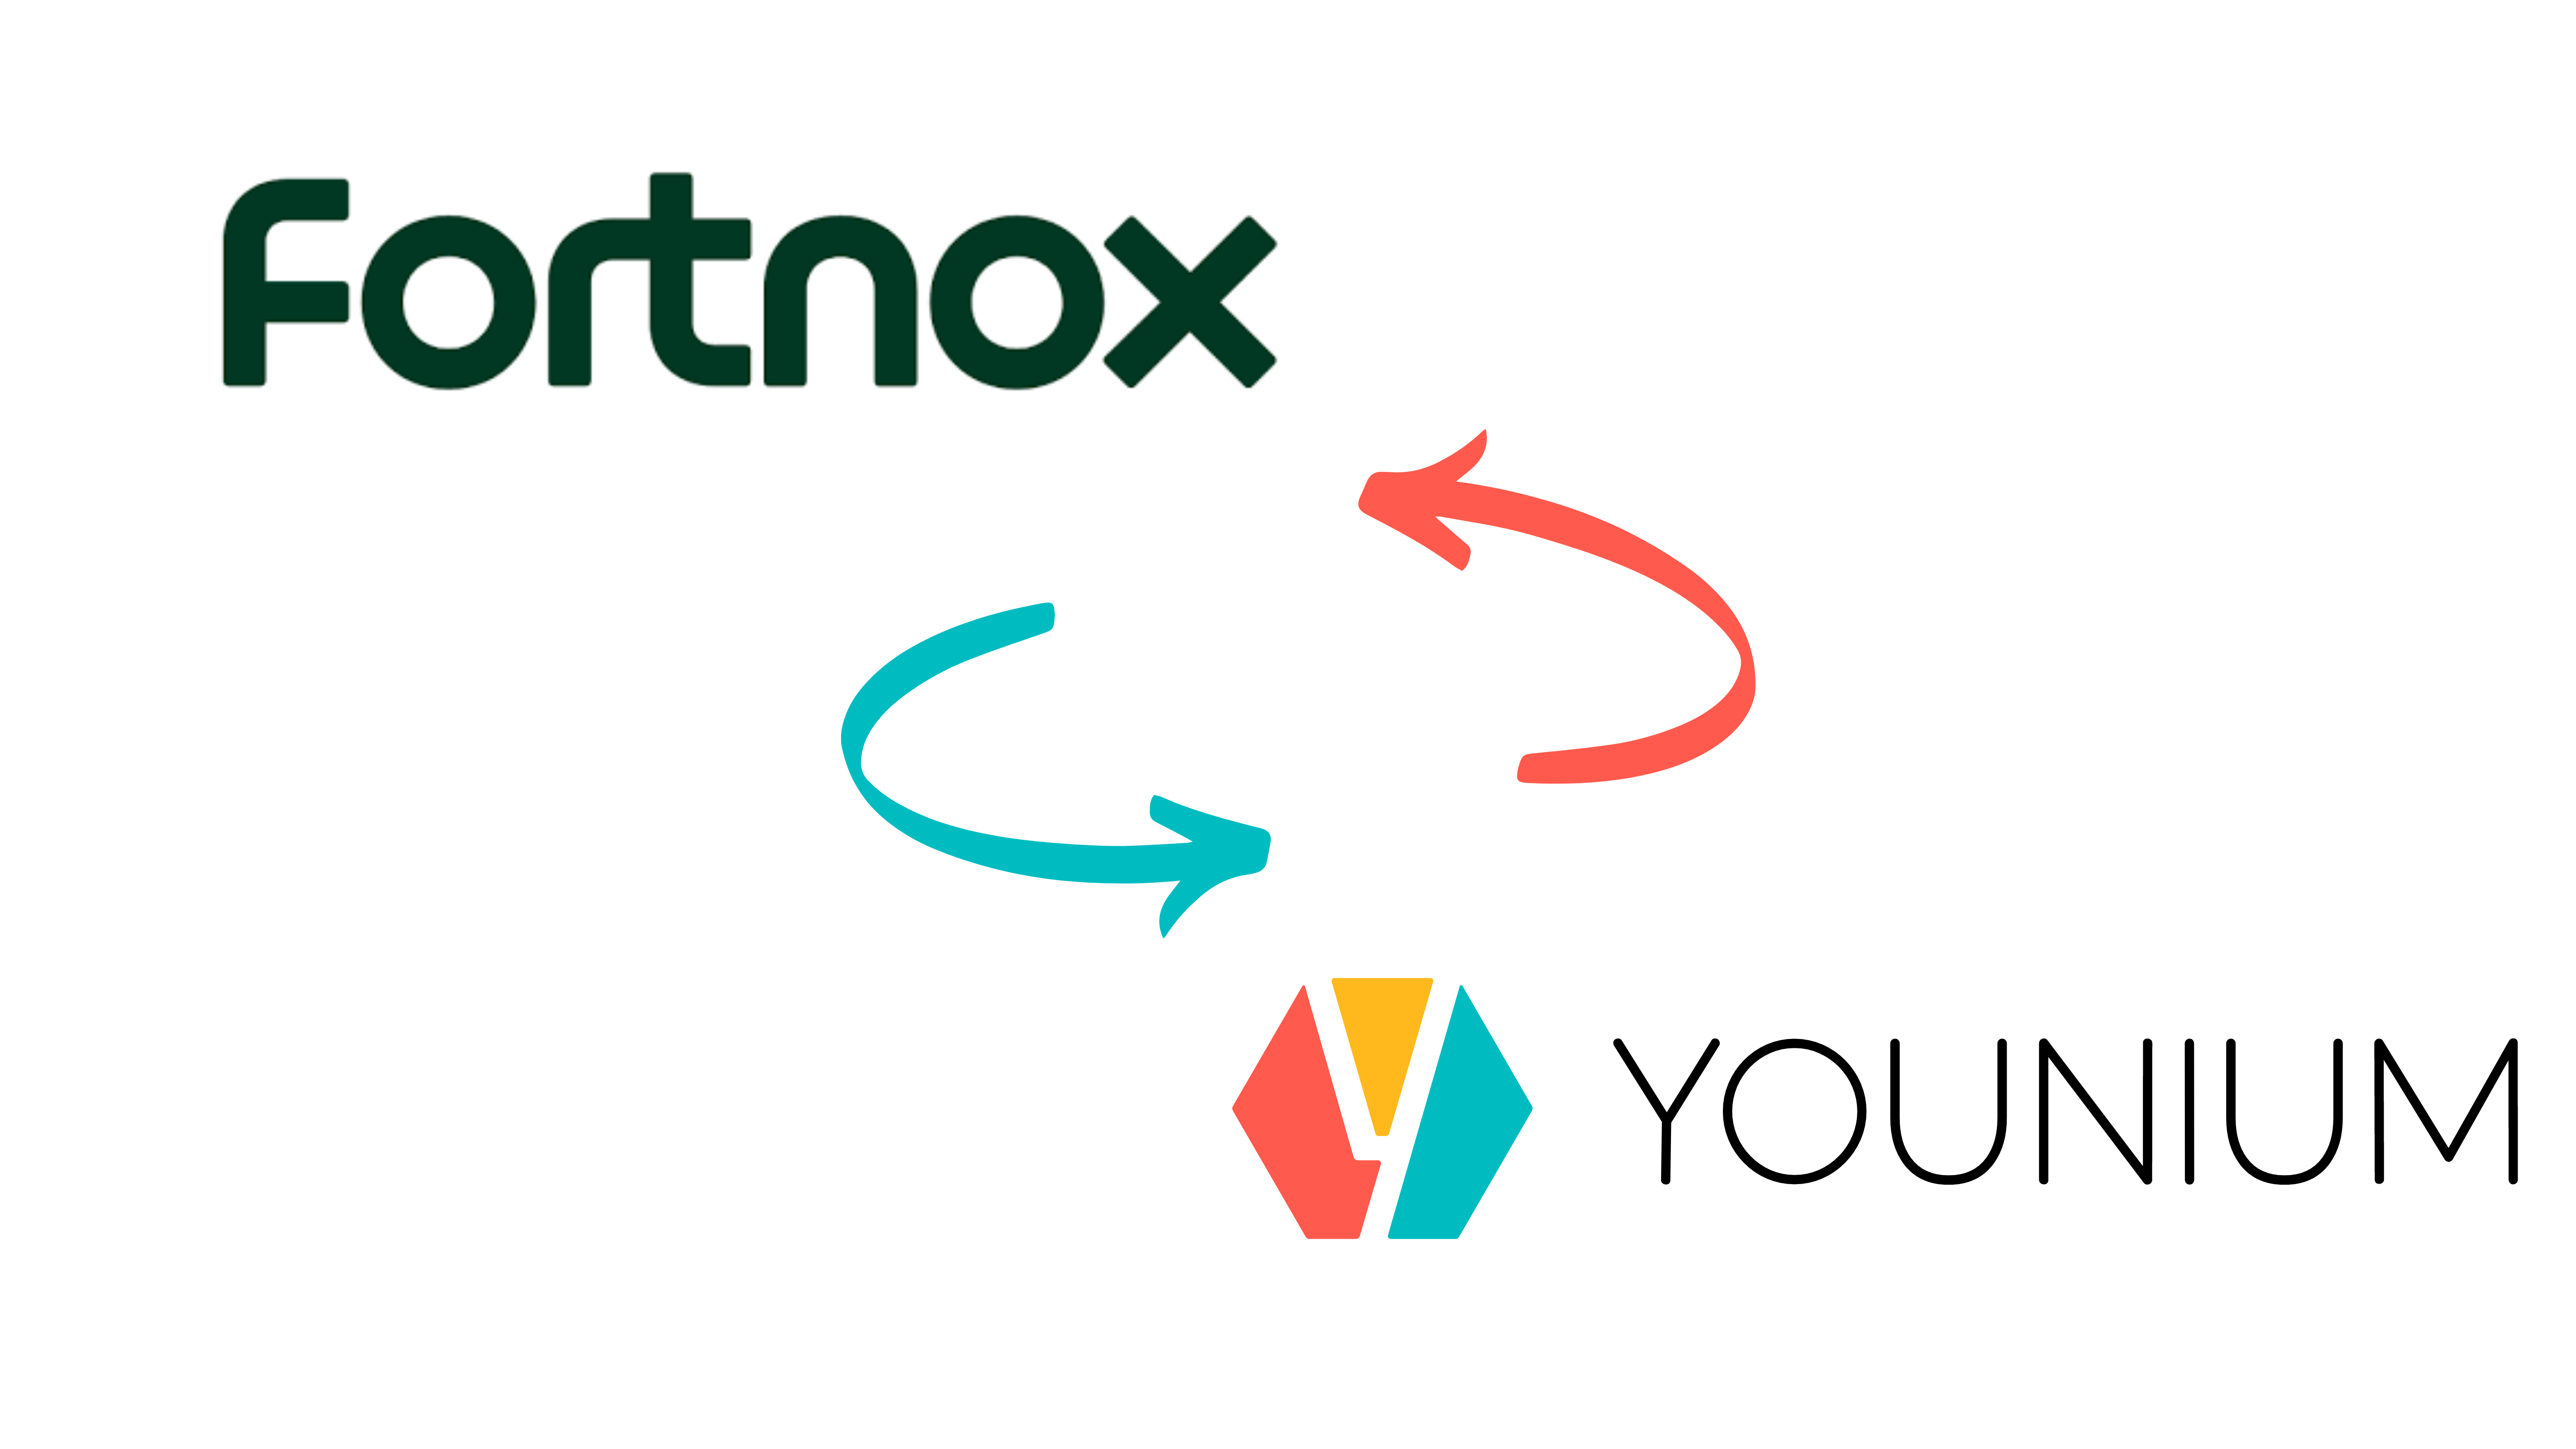 Fortnox Accounting Software: Streamline Your Finances!